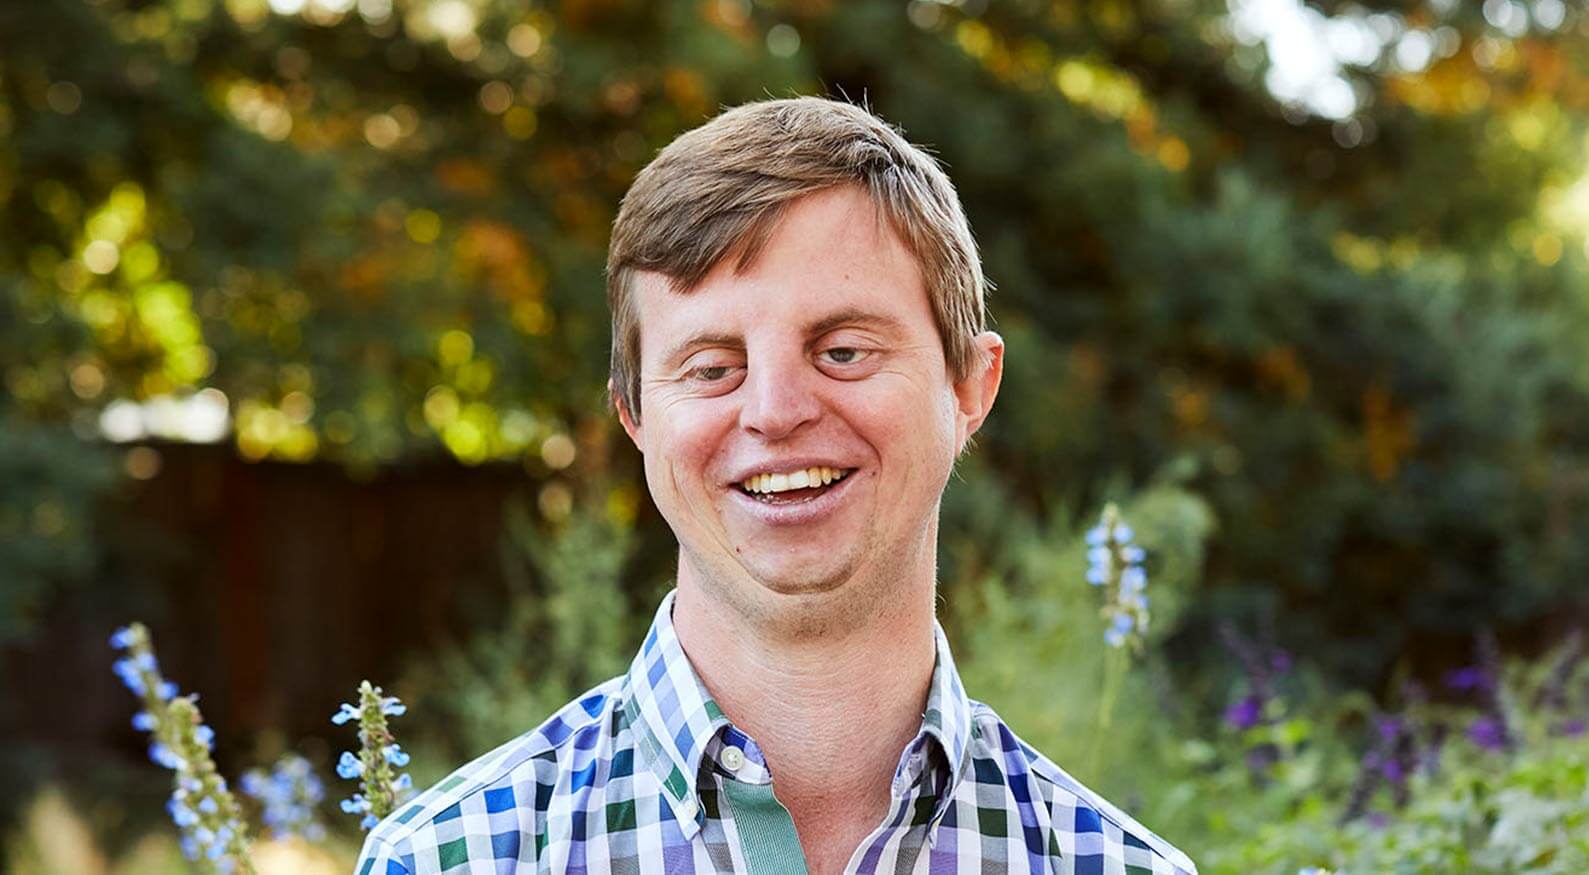 Dr. Hoby Webler is smiling at the camera and wearing a blue plaid shirt in front of a forest tree setting